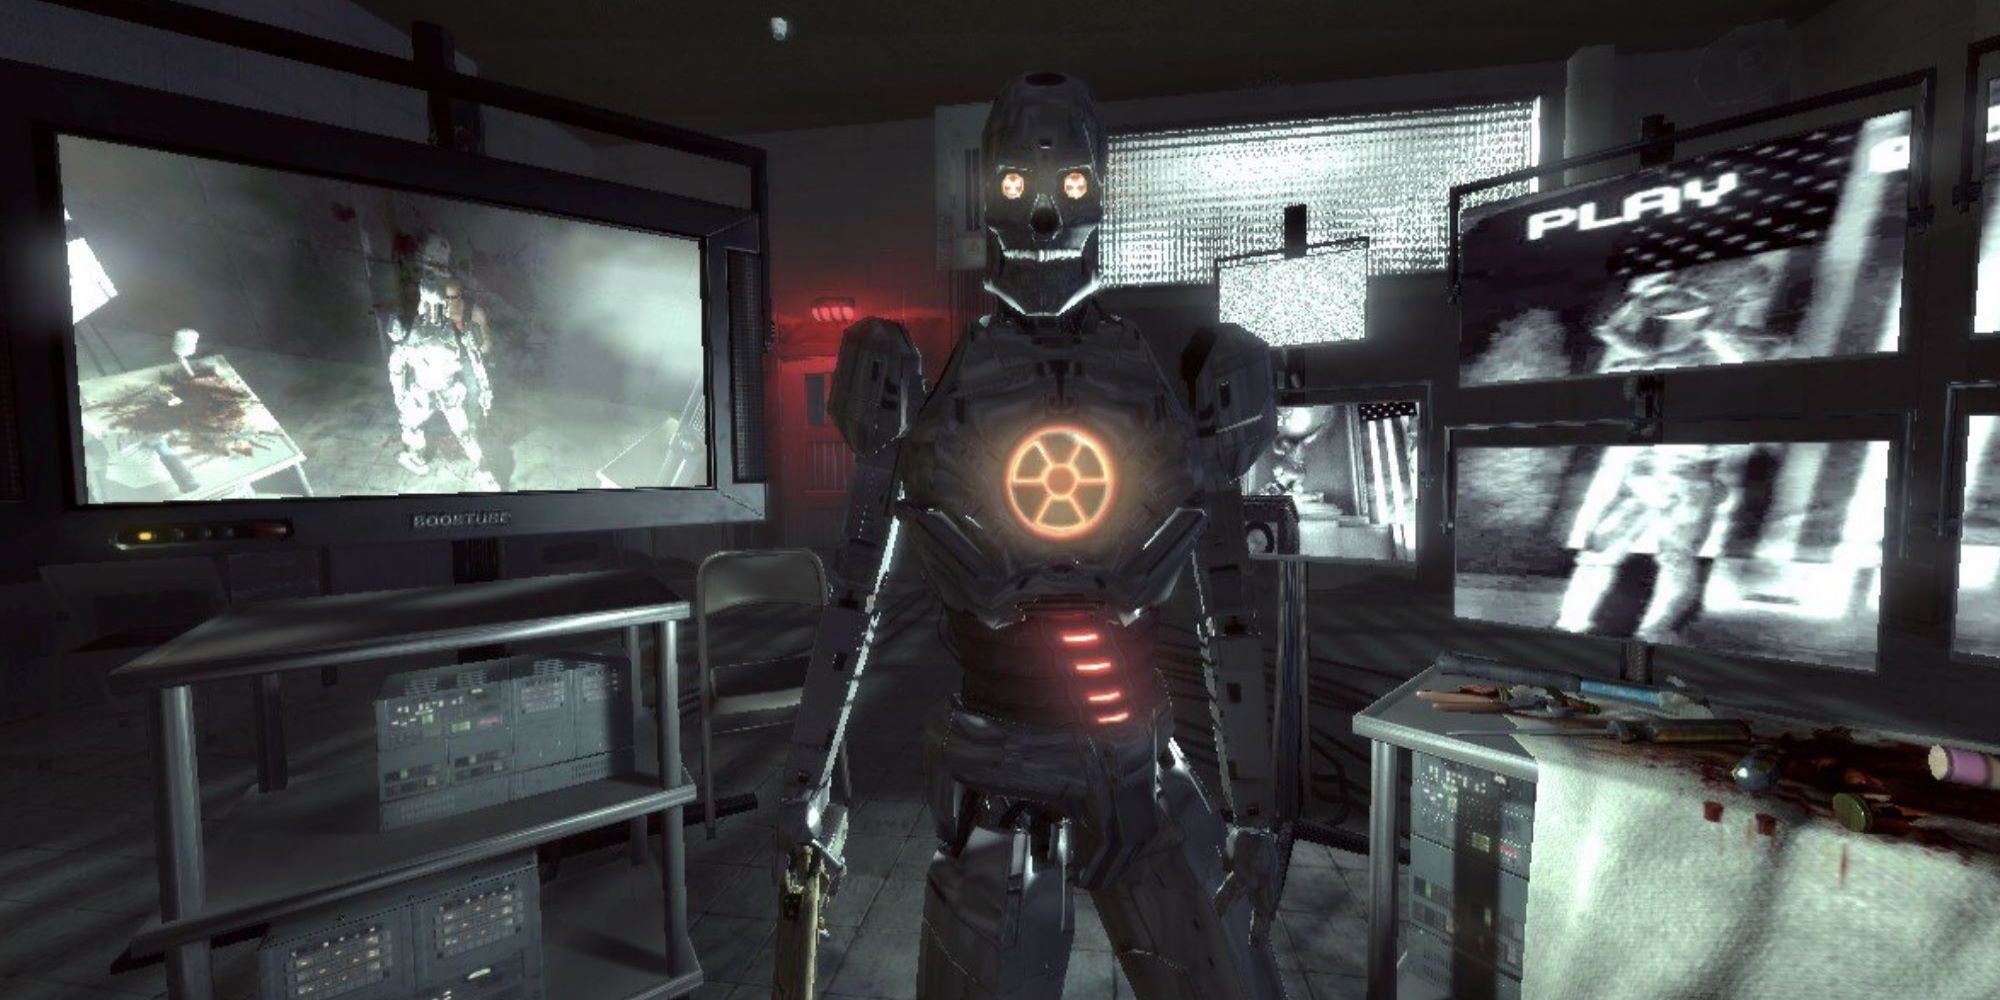 A robot facing the player in a torture room near TVs depicting Duke Nukem